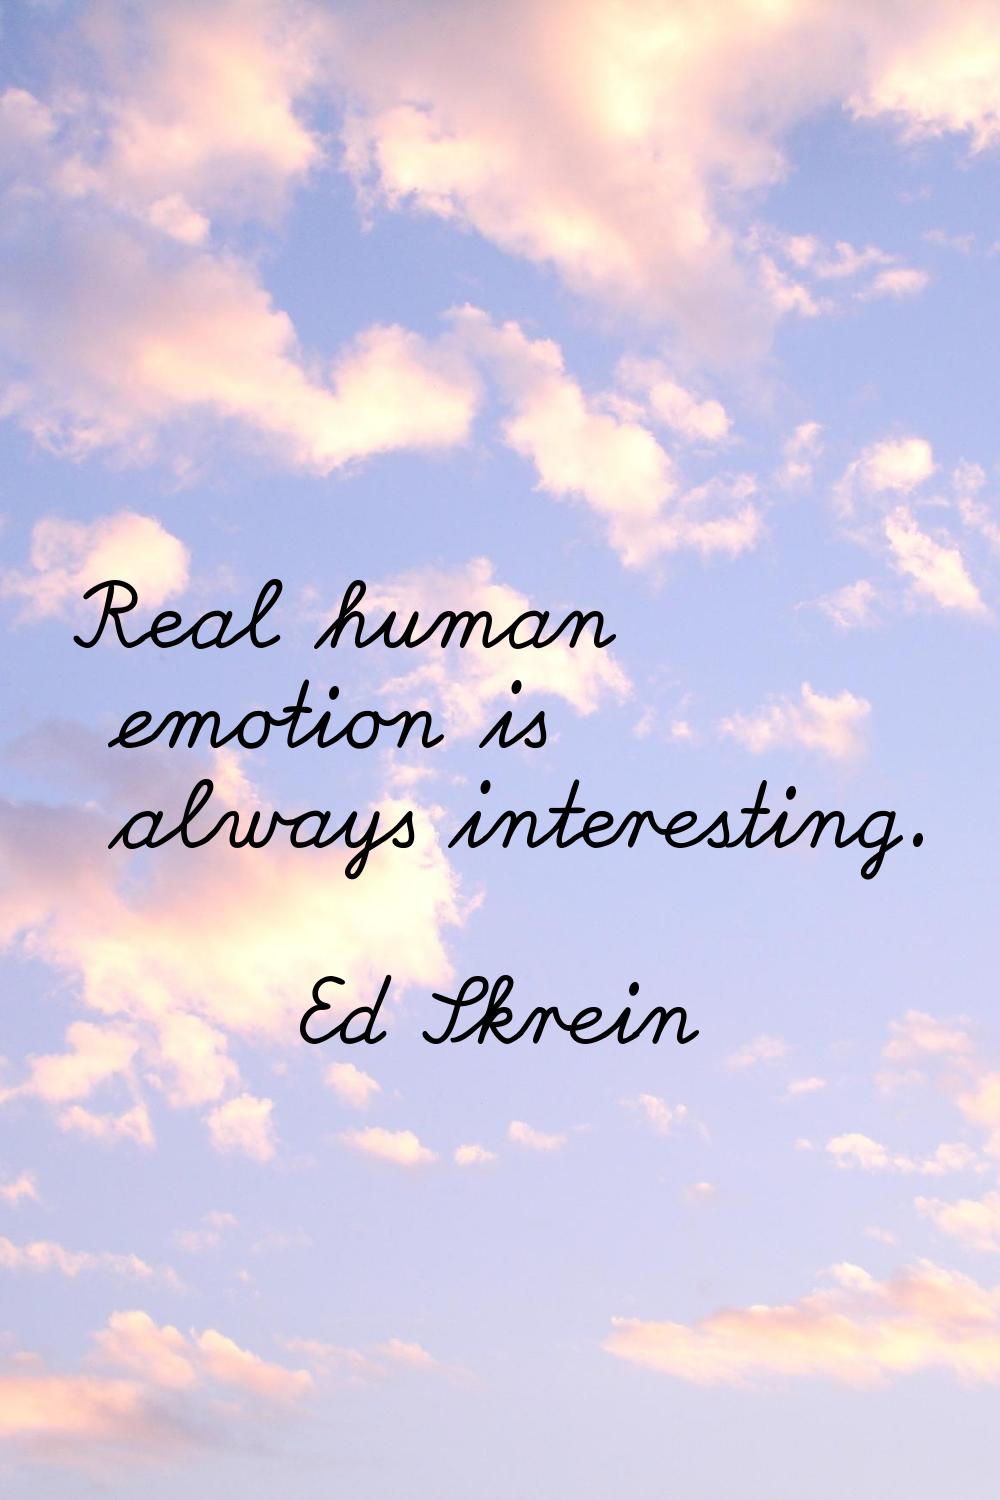 Real human emotion is always interesting.